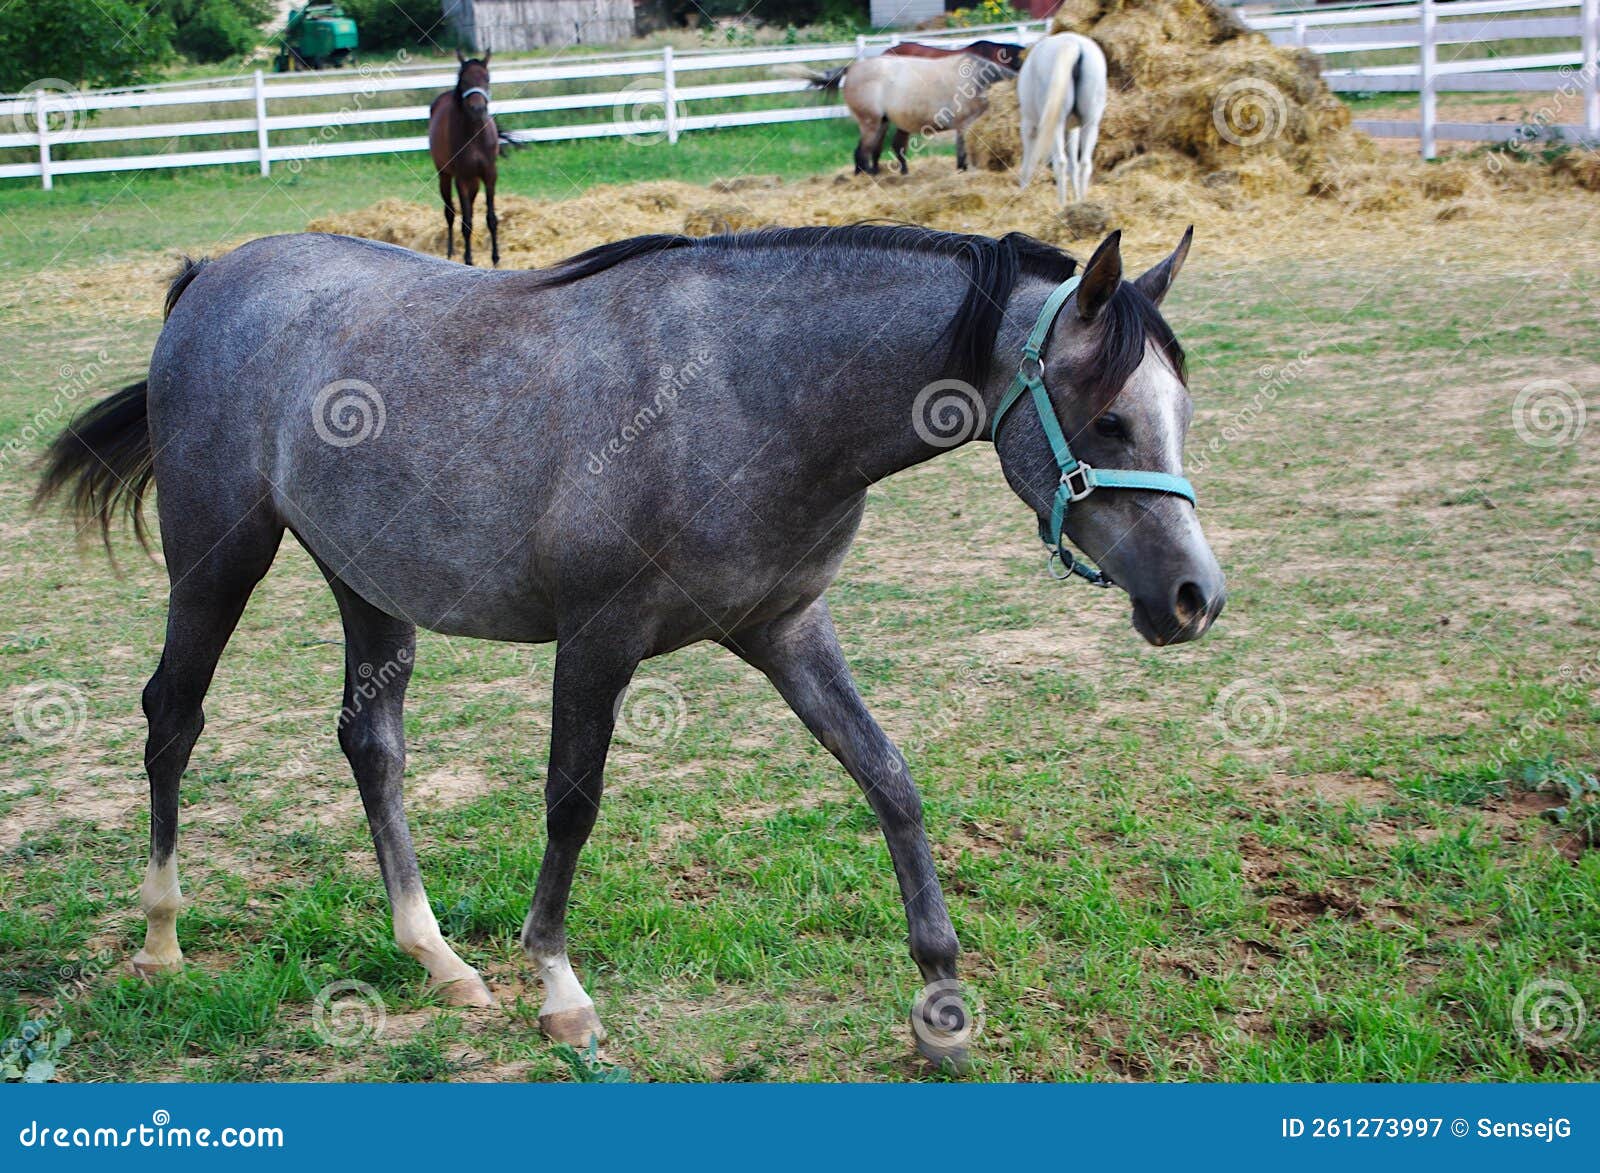 arab horse with gray ointment goes through the paddock.